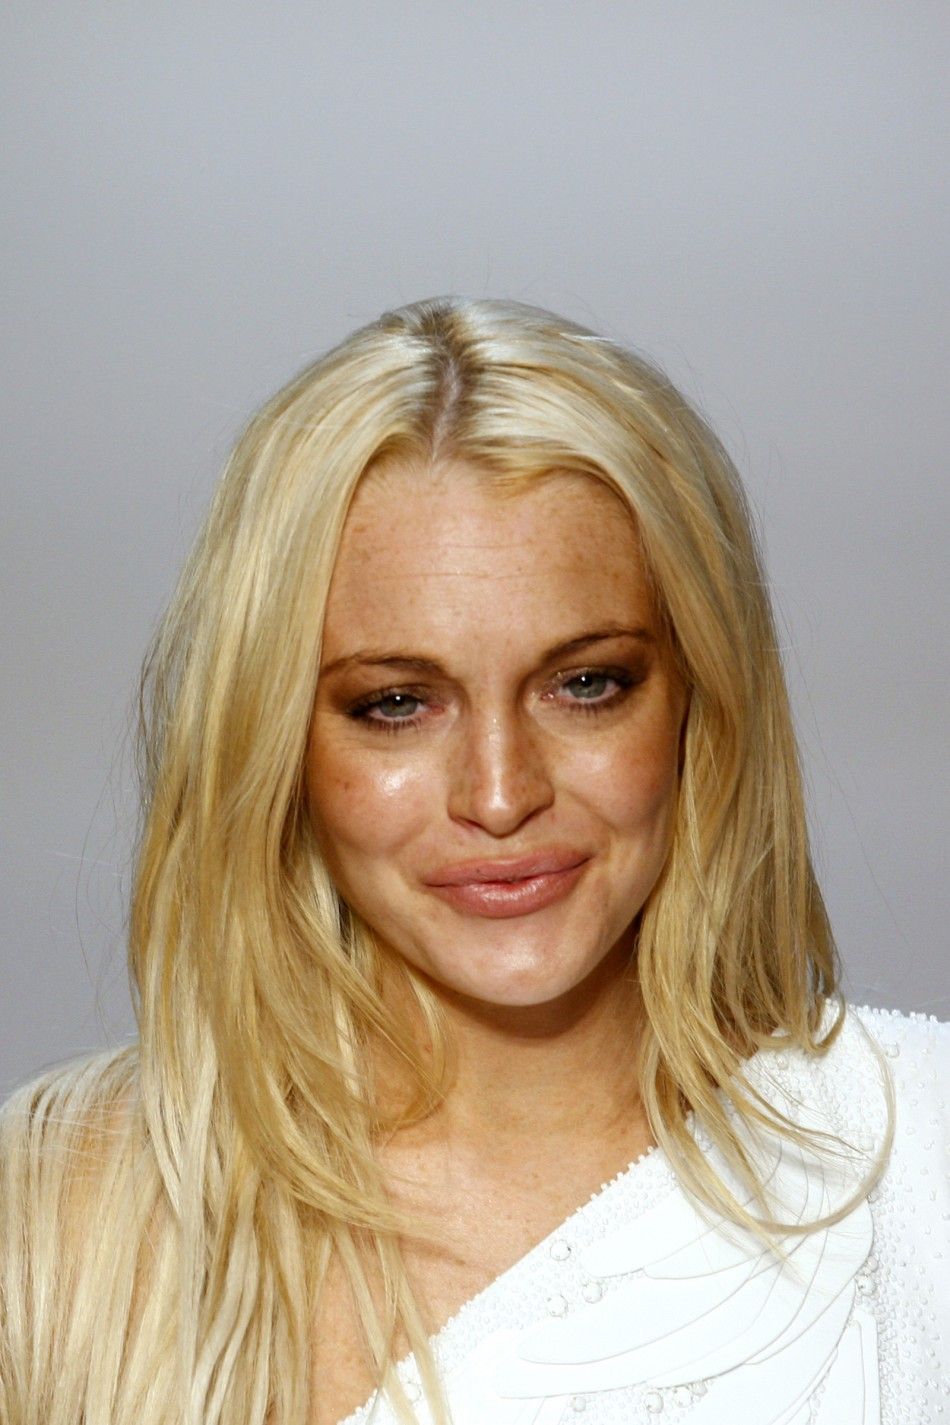 Lindsay Lohan’s ‘Changing Face’ Video Shows Drastic Aging Of 25Year